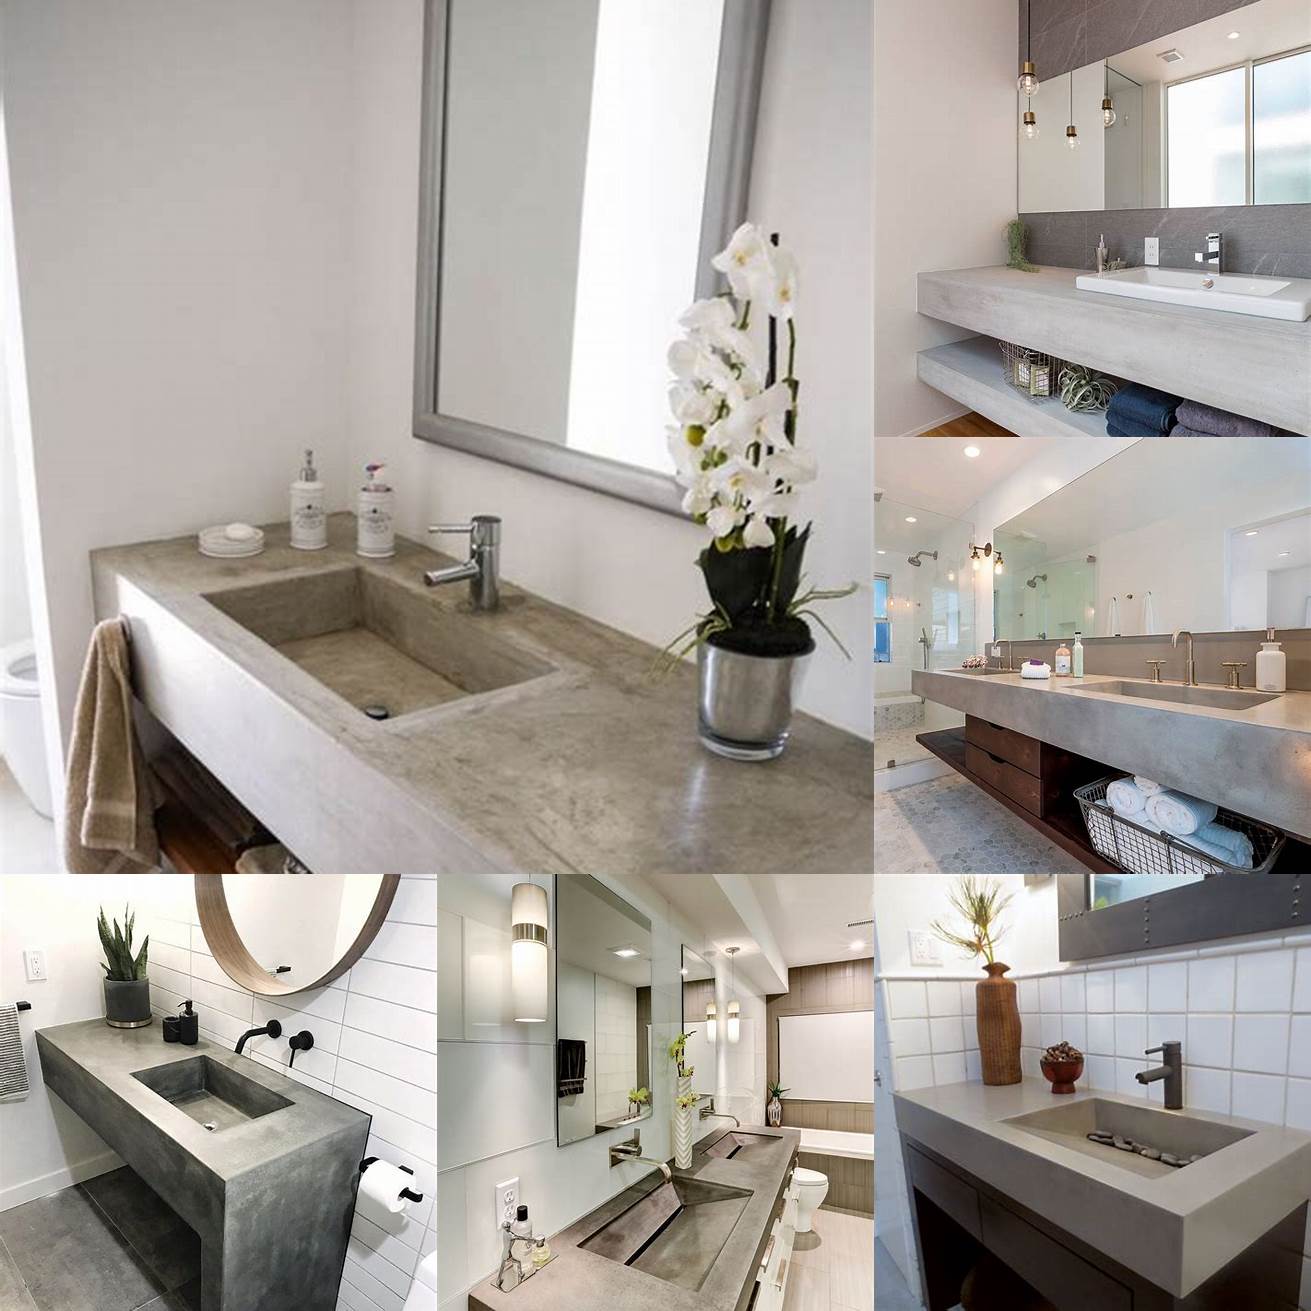 A concrete bathroom vanity base adds a unique and modern look to your bathroom